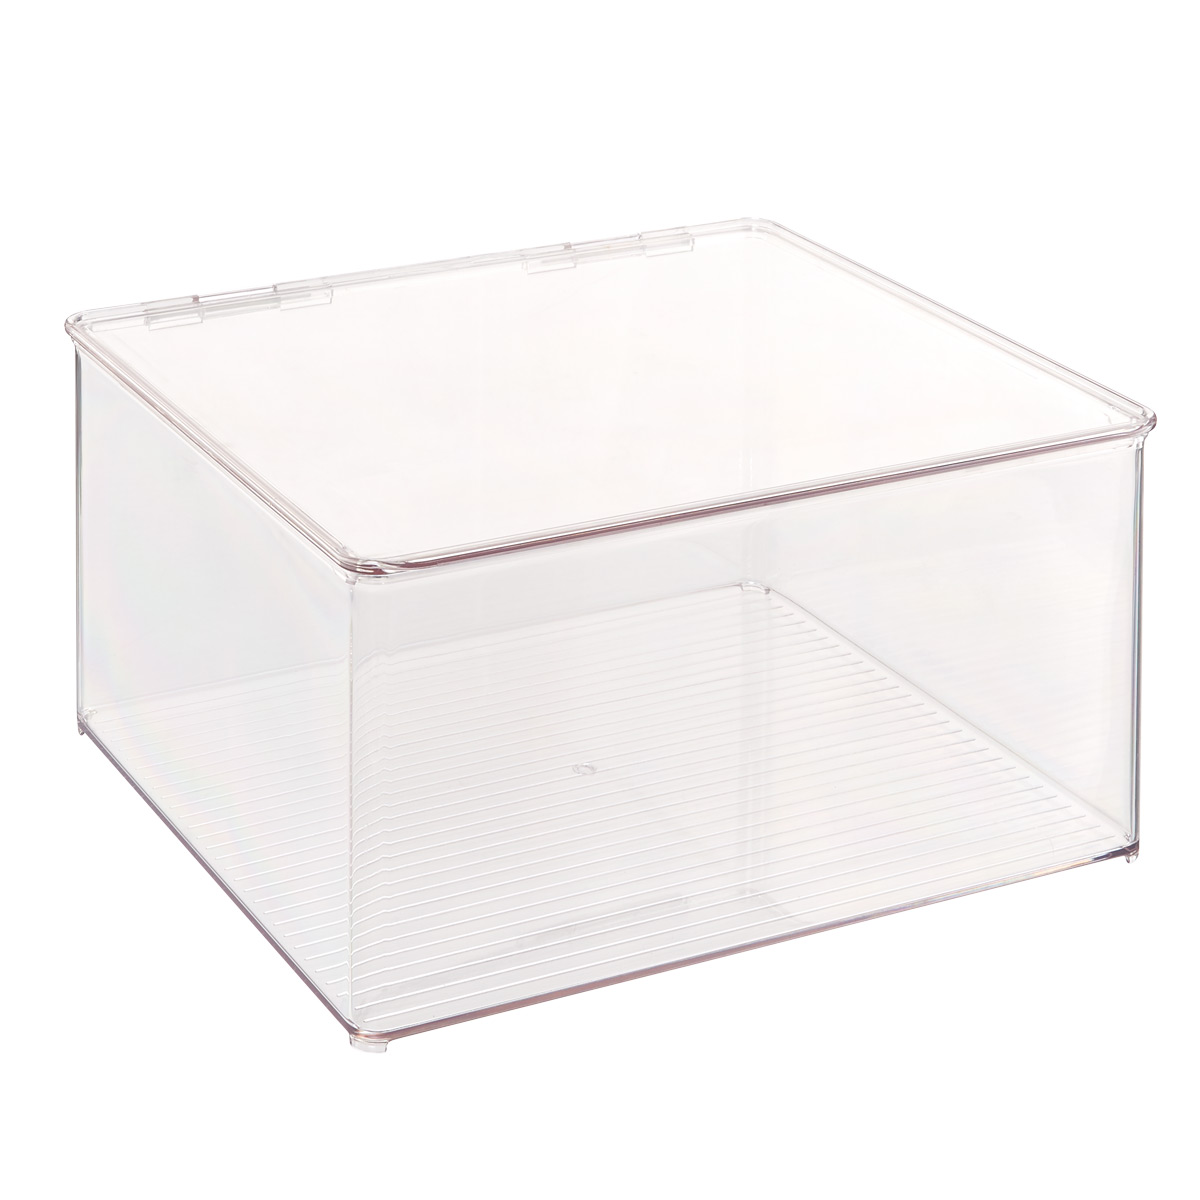 iDESIGN Hinged-Lid Stackable Sweater Box Clear